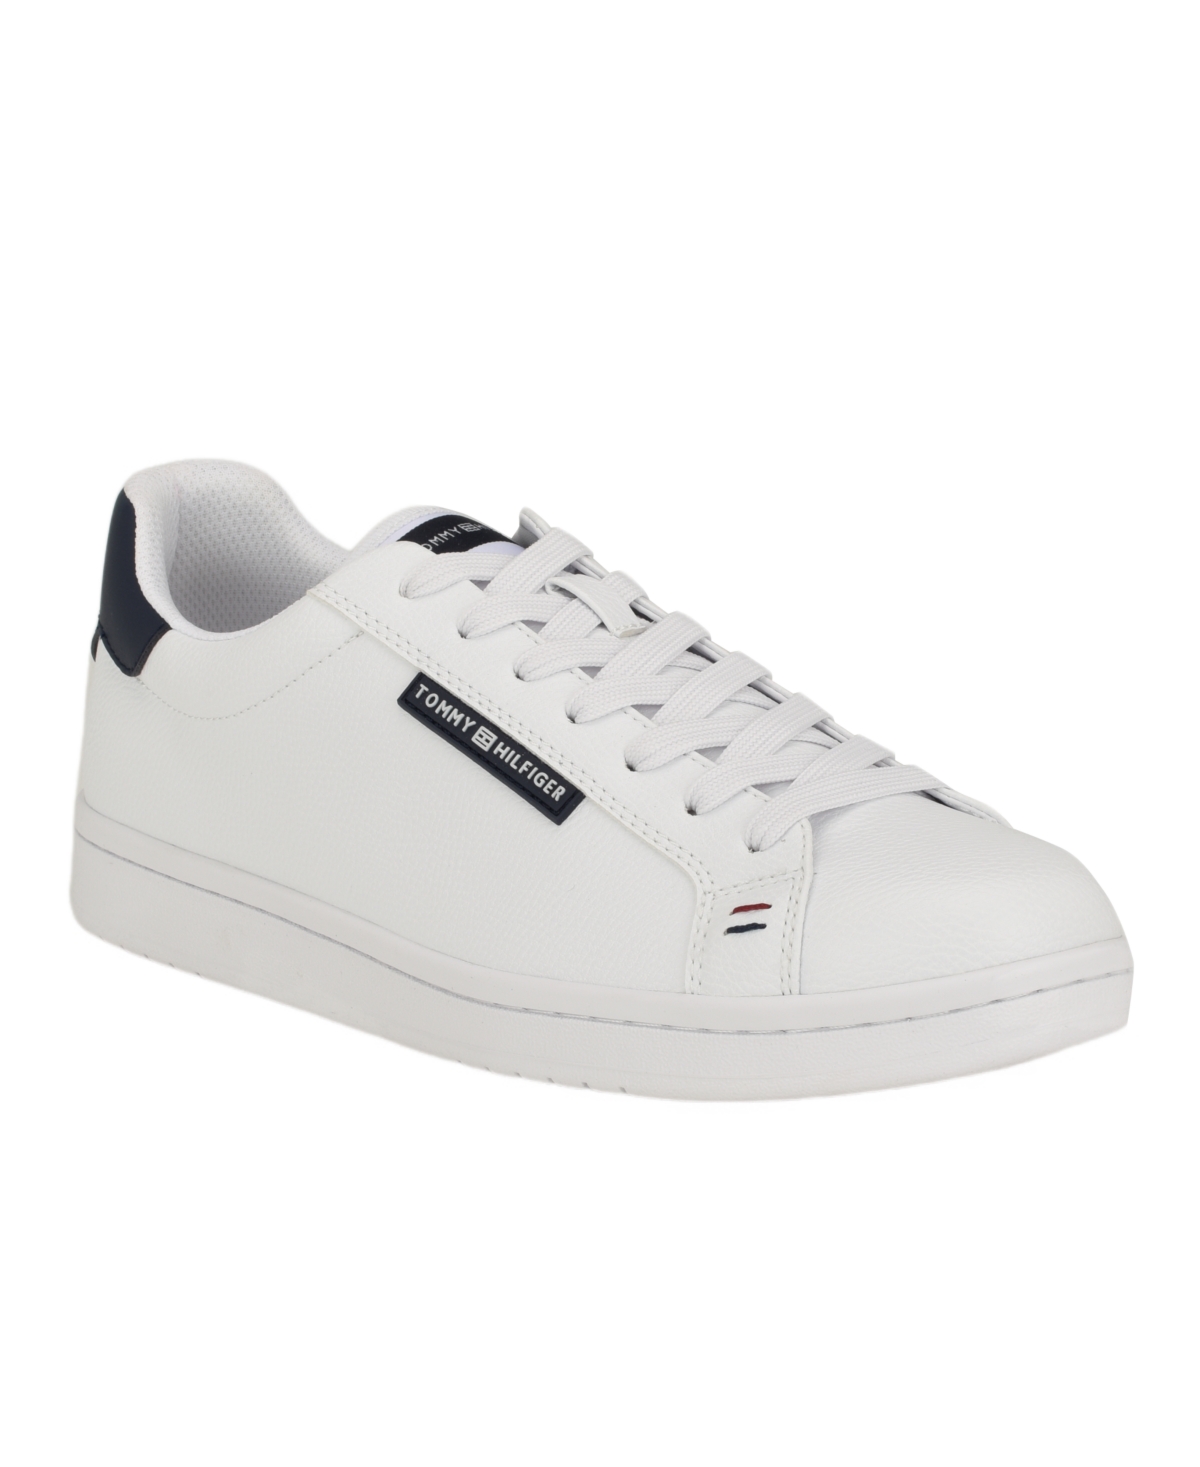 Tommy Hilfiger Men's Landis Lace Up Fashion Sneakers In White,navy